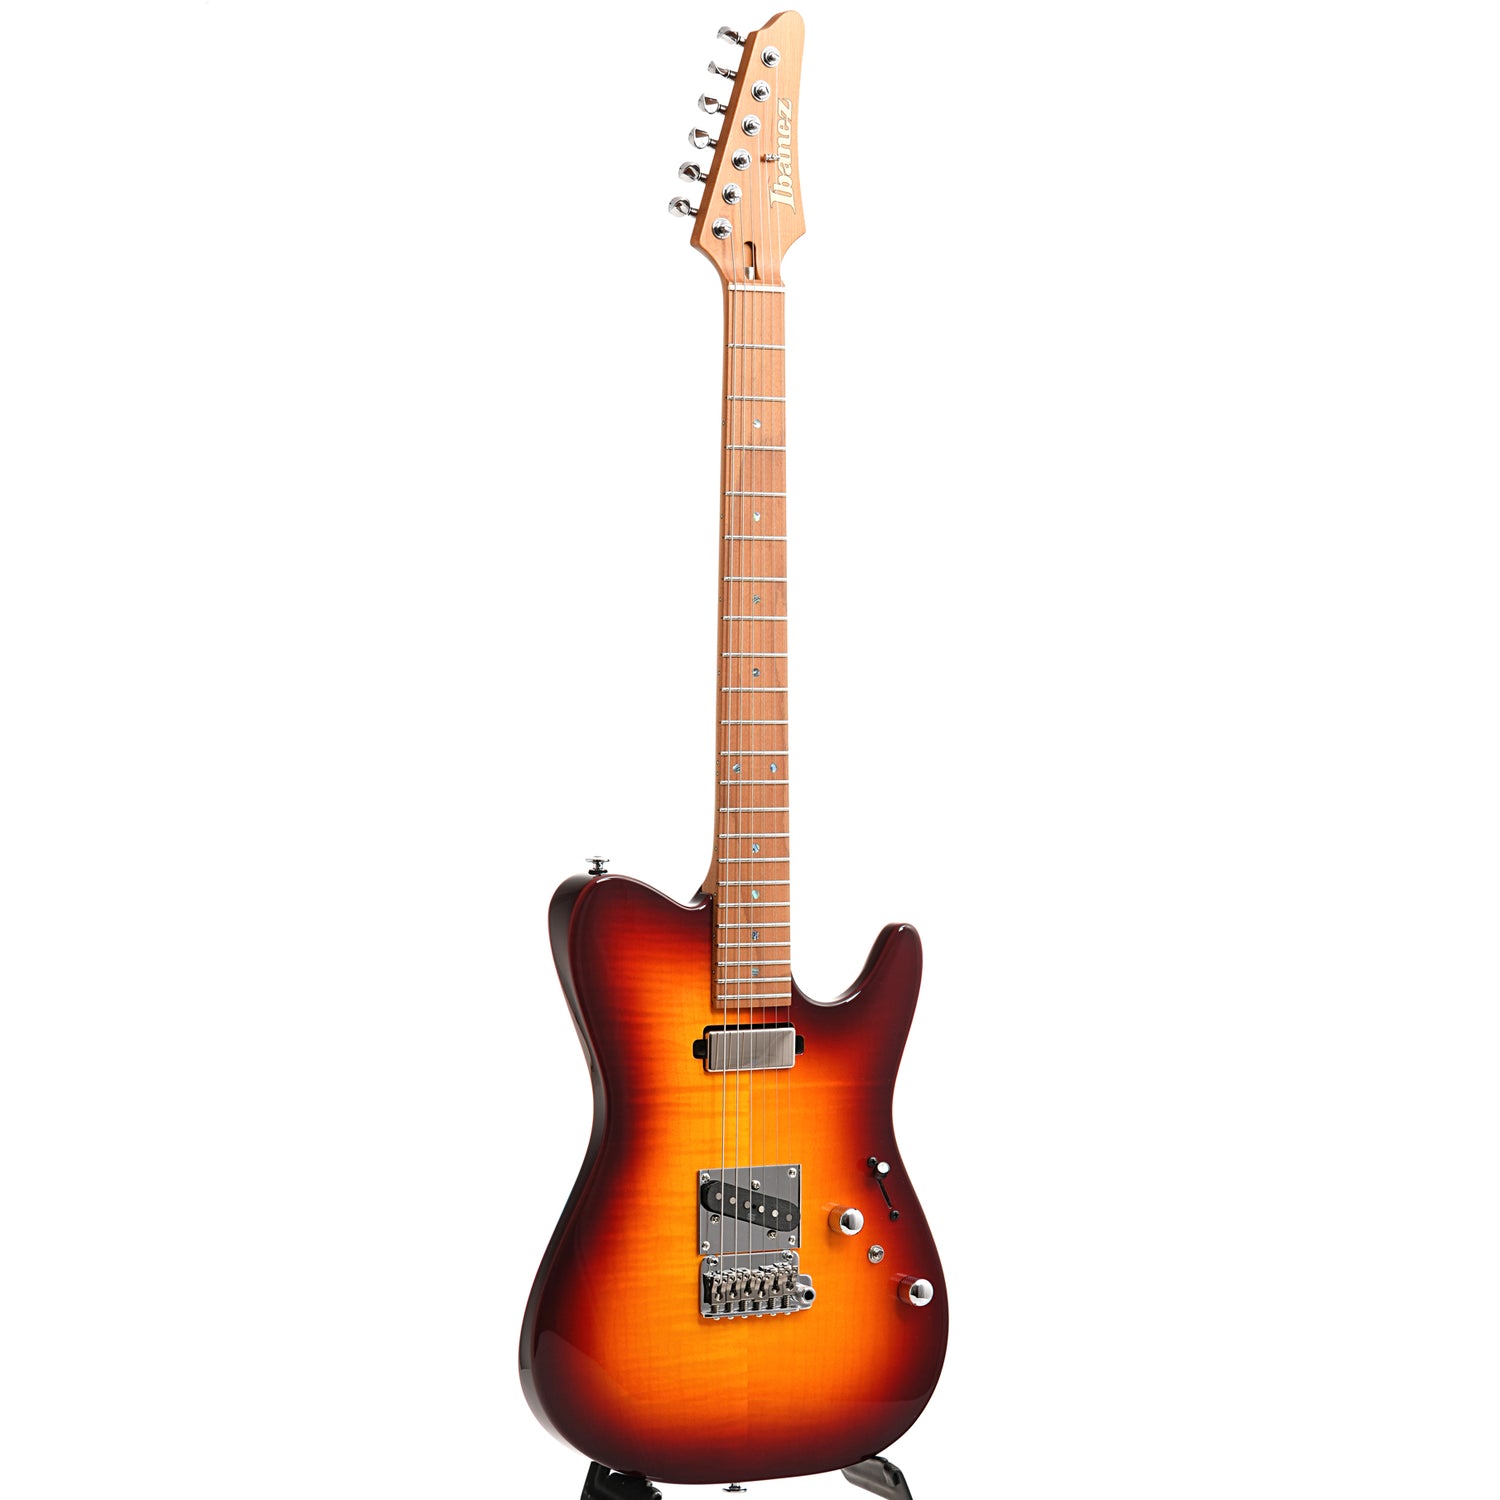 Image 11 of Ibanez Prestige Series AZS2200F Electric Guitar, Sunset Burst - SKU# AZS2200F-STB : Product Type Solid Body Electric Guitars : Elderly Instruments